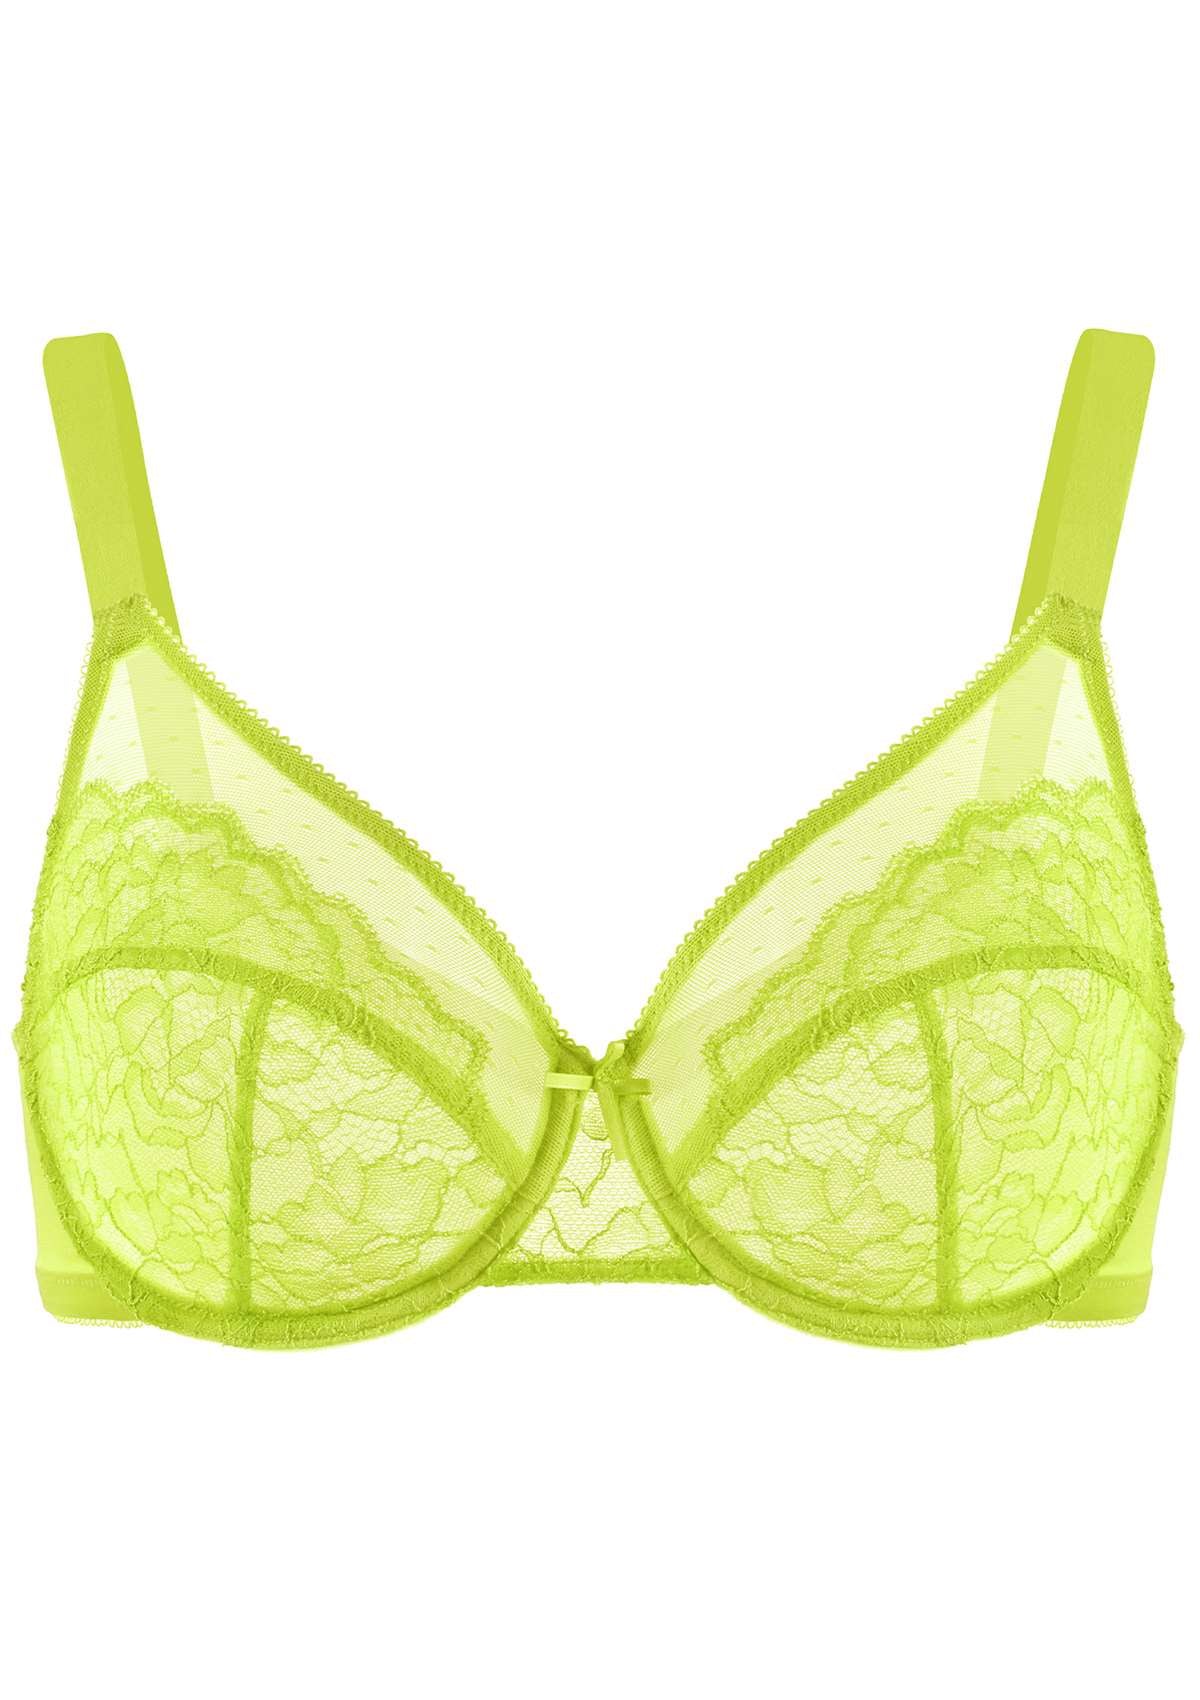 HSIA Enchante Full Cup Minimizing Bra: Supportive Unlined Lace Bra - Lime Green / 36 / G